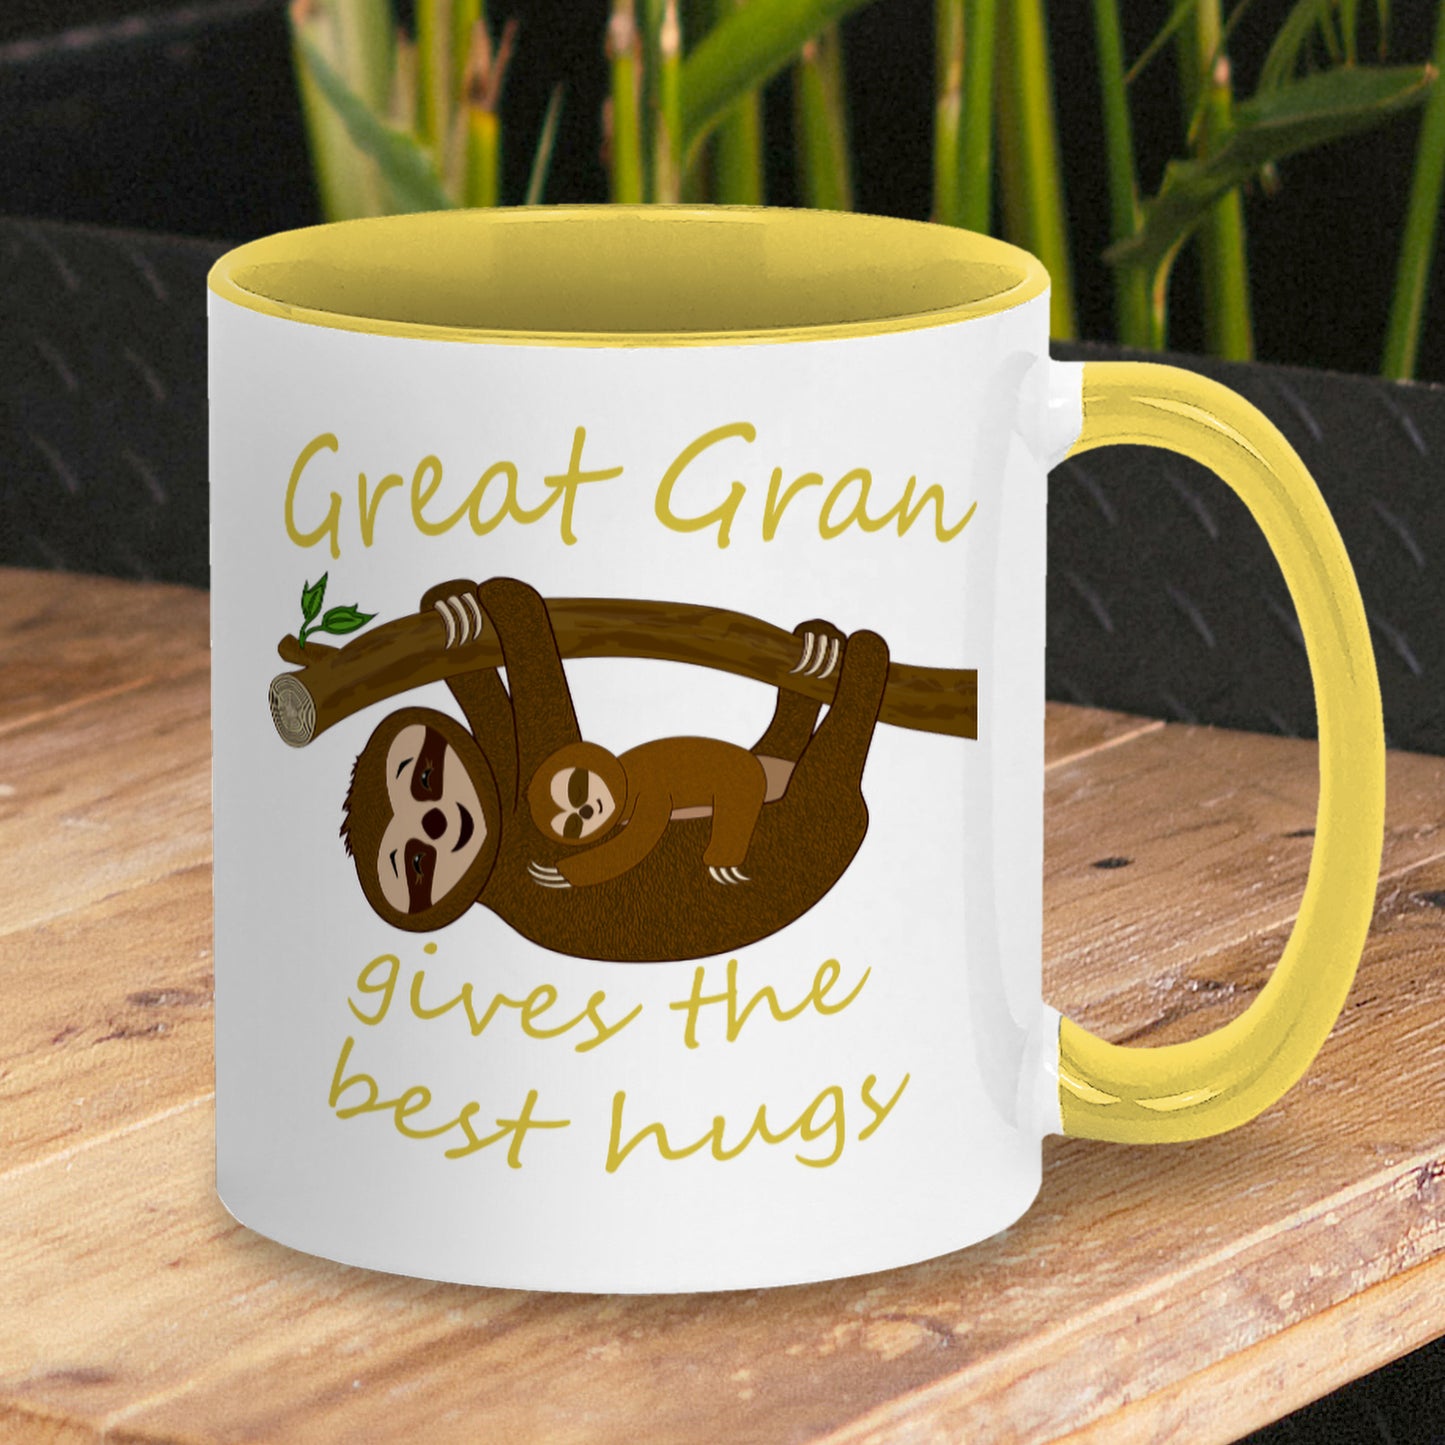 Personalised Tea / Coffee cup gift. Cute cuddly three toed sloths on a branch. Mum and baby. Two tone white with yellow ceramic coffee mug. Customisable name reads Great Gran gives the best hugs in yellow font.